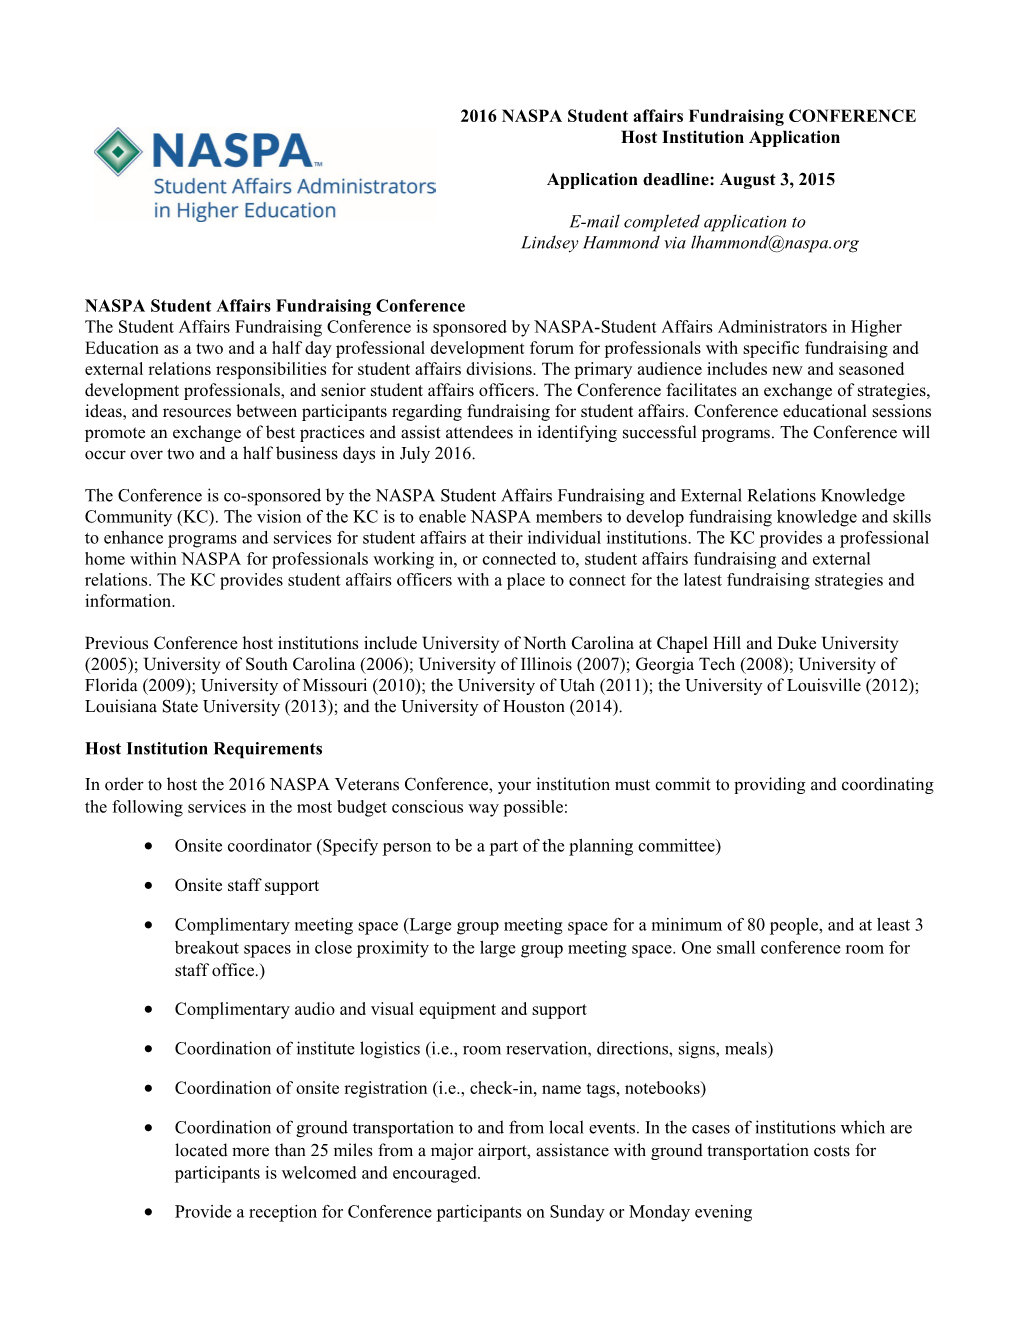 2016 NASPA Student Affairs Fundraising CONFERENCE Host Institution Application